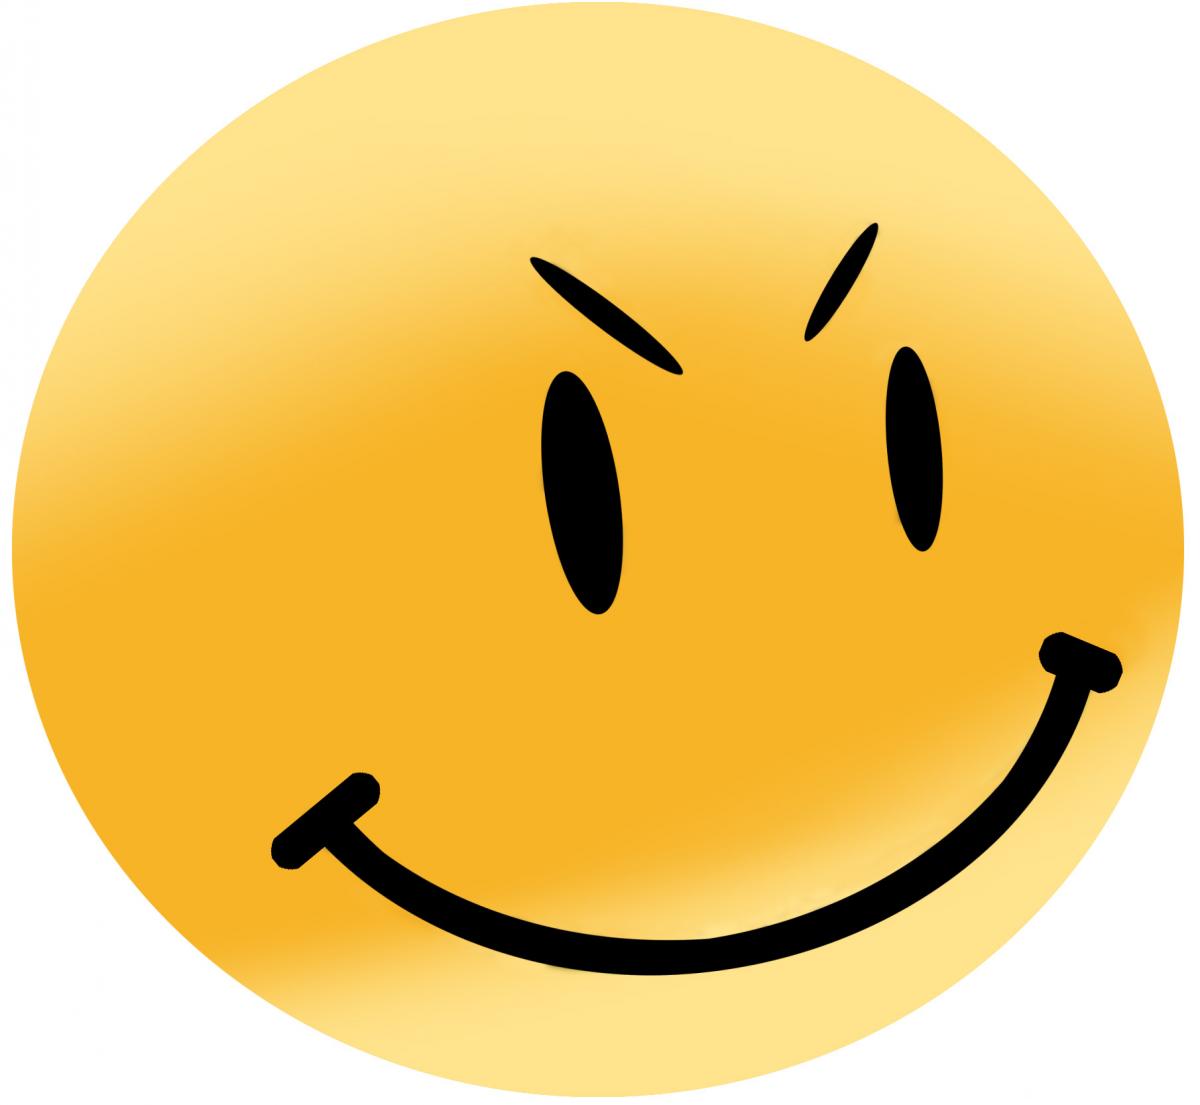 Shocked Smiley Face - ClipArt Best